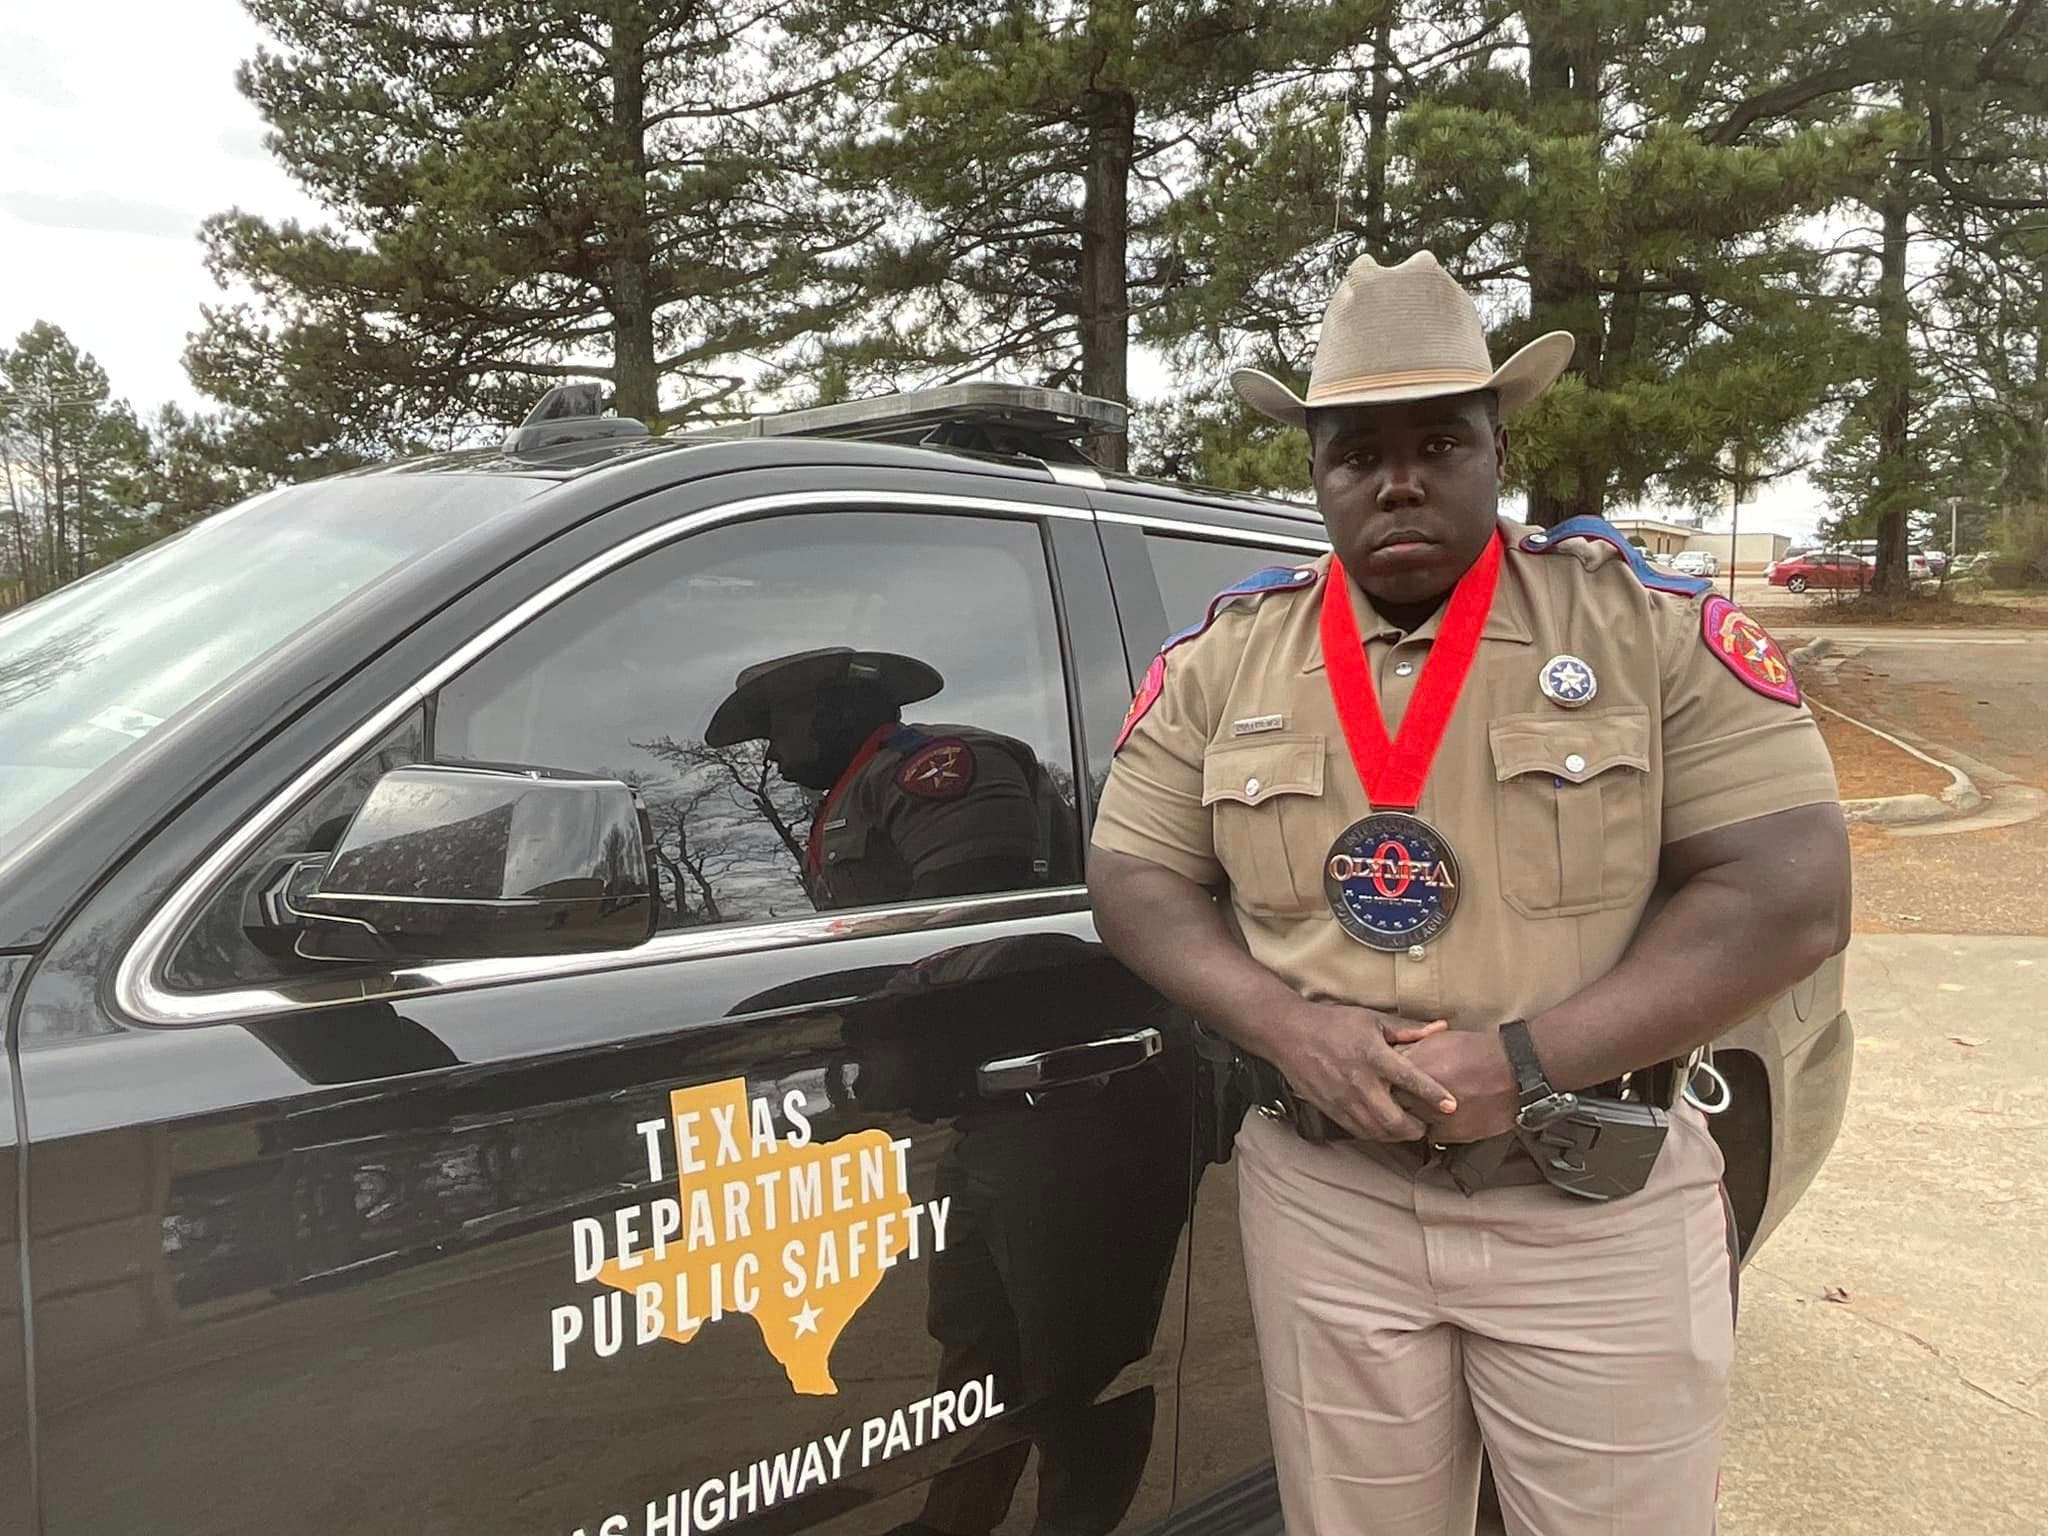 Texas trooper medals in bench press event at international powerlifting competition